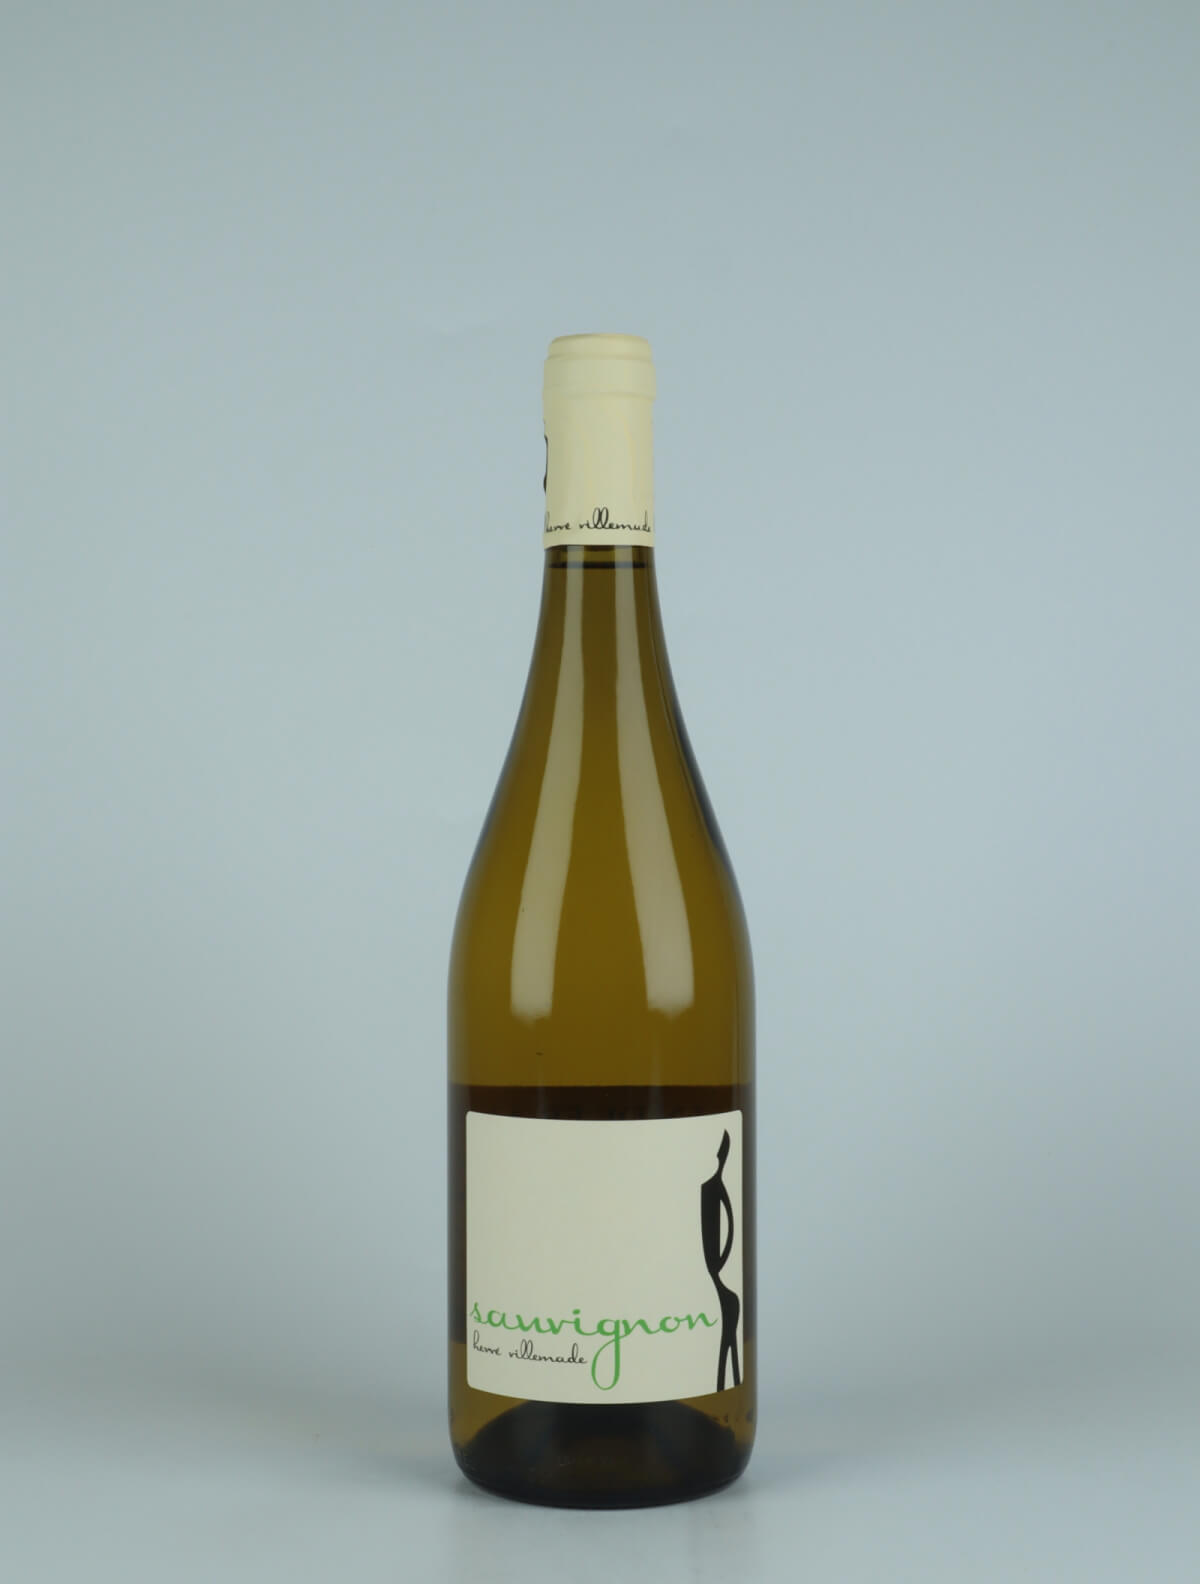 A bottle 2022 Sauvignon Blanc White wine from Hervé Villemade, Loire in France